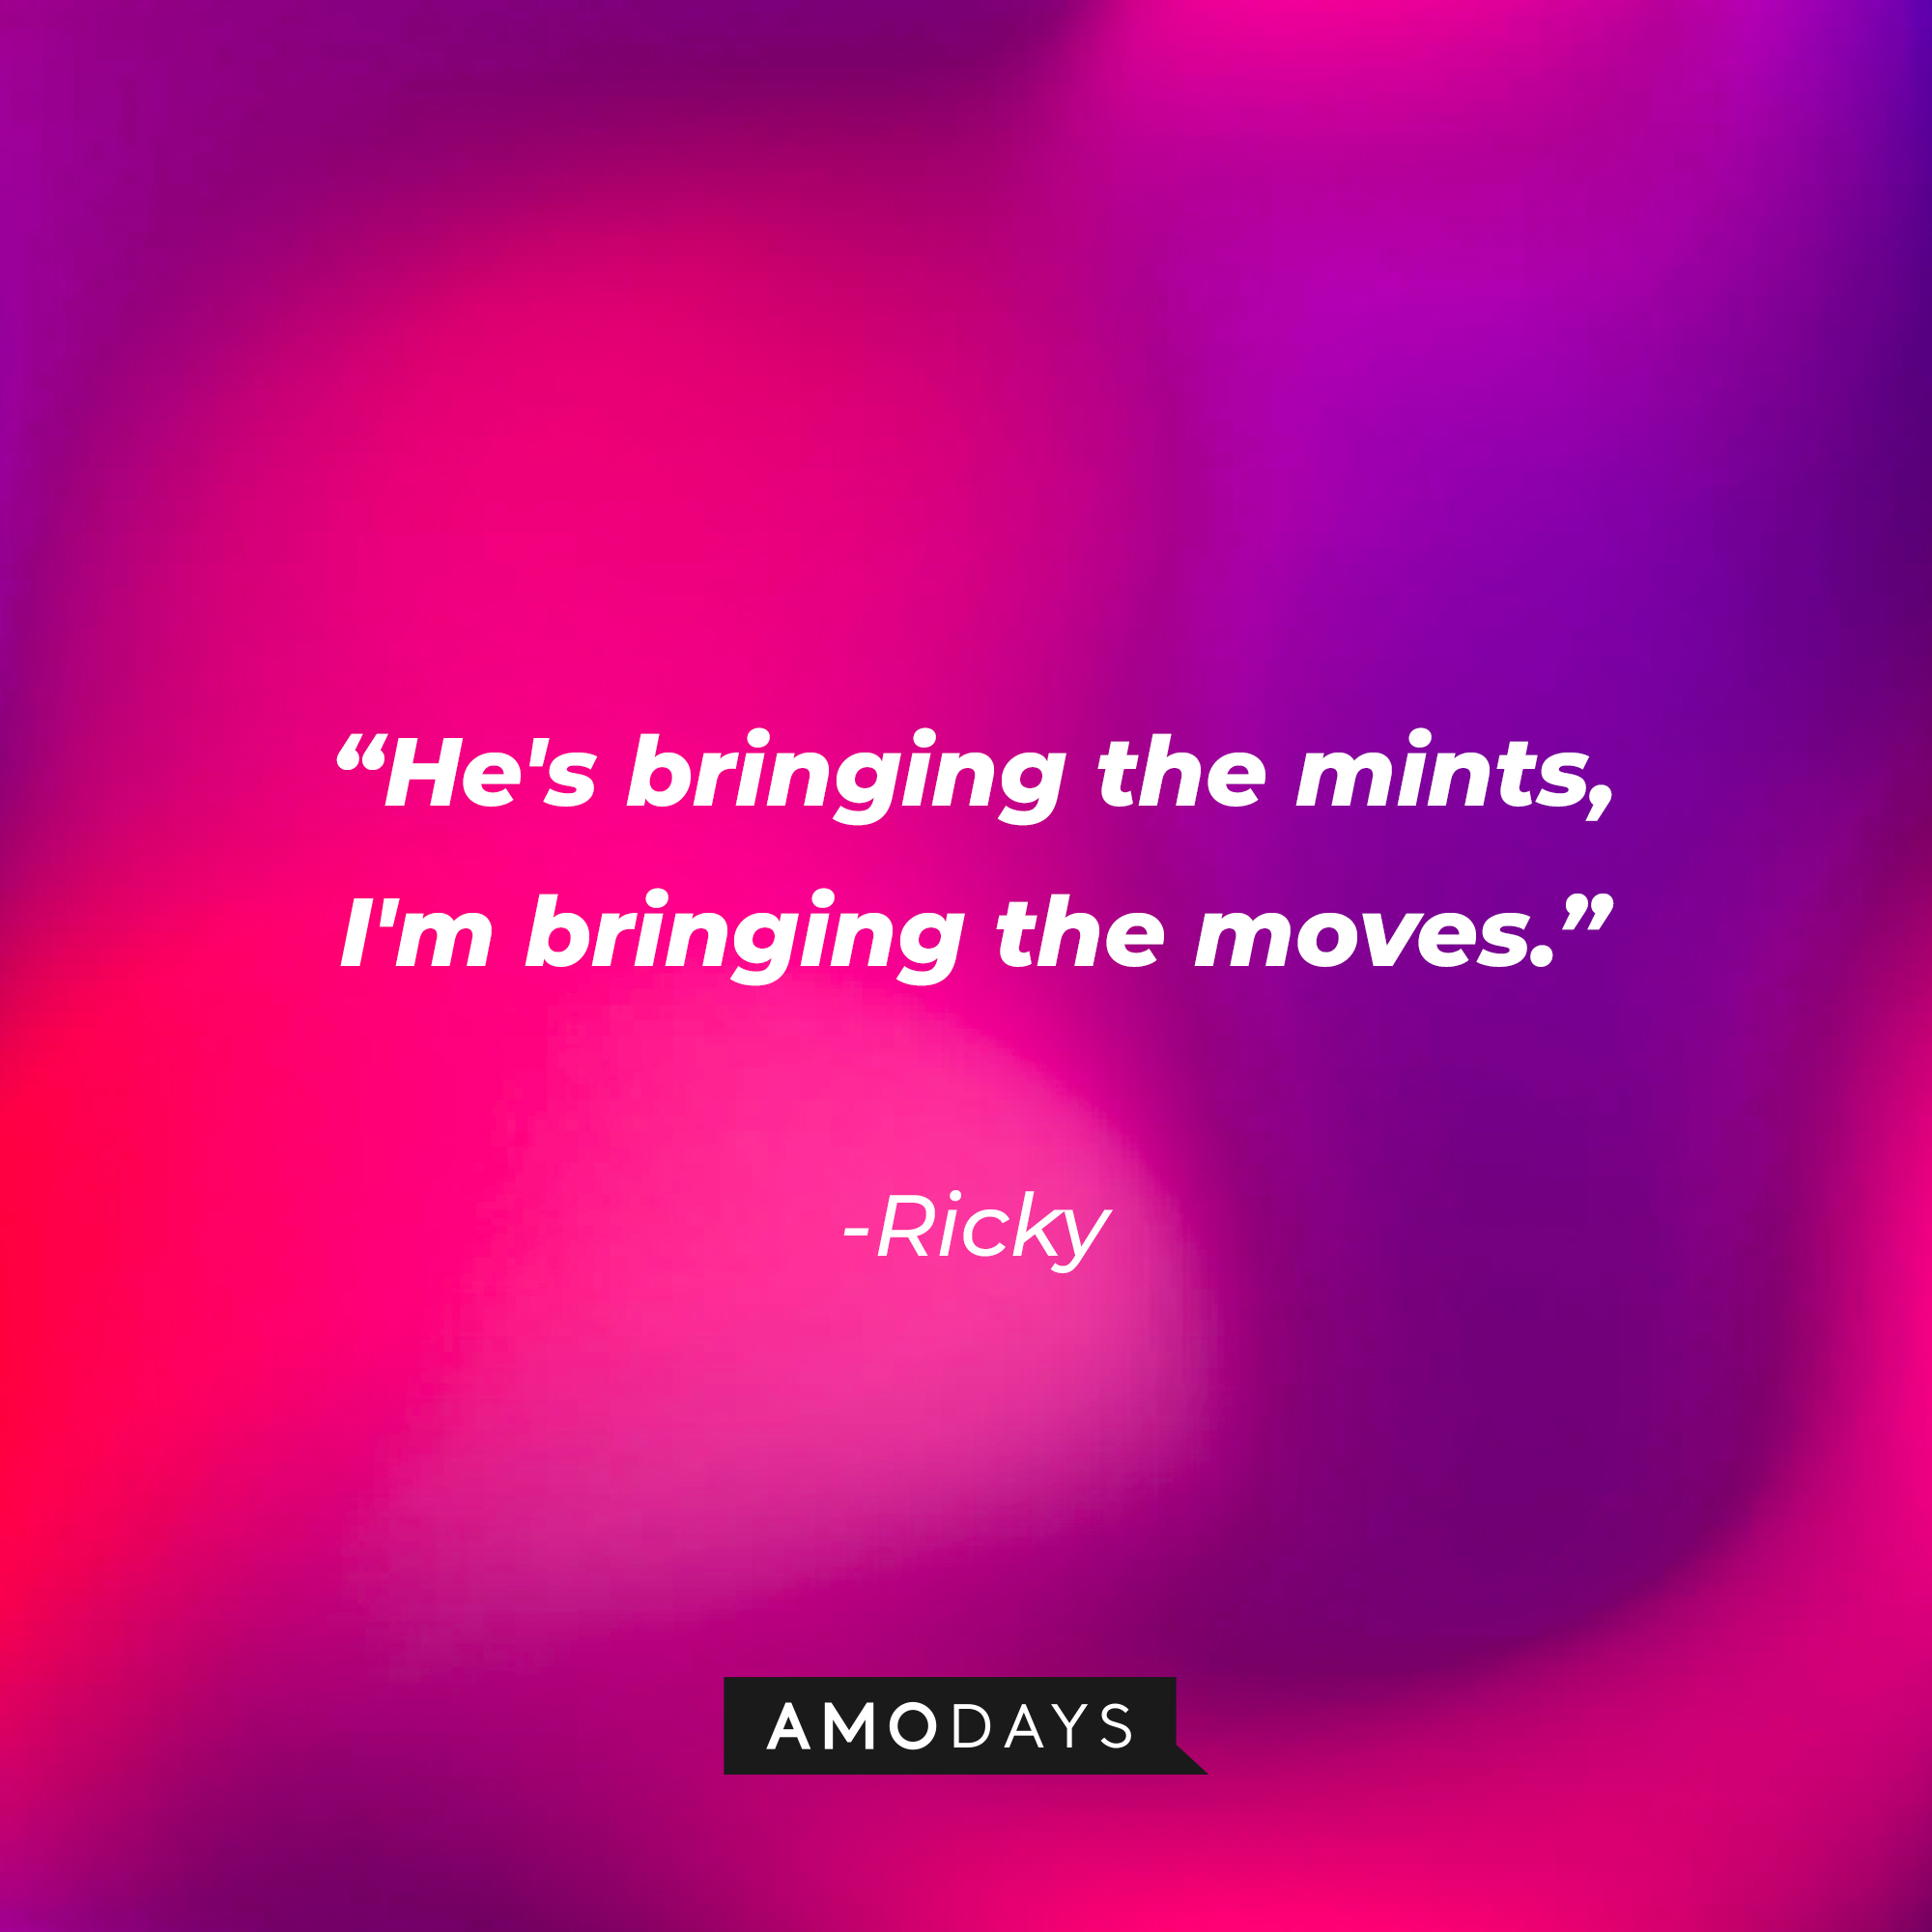 Ricky’s quote: "He's bringing the mints, I'm bringing the moves." | Source: AmoDays